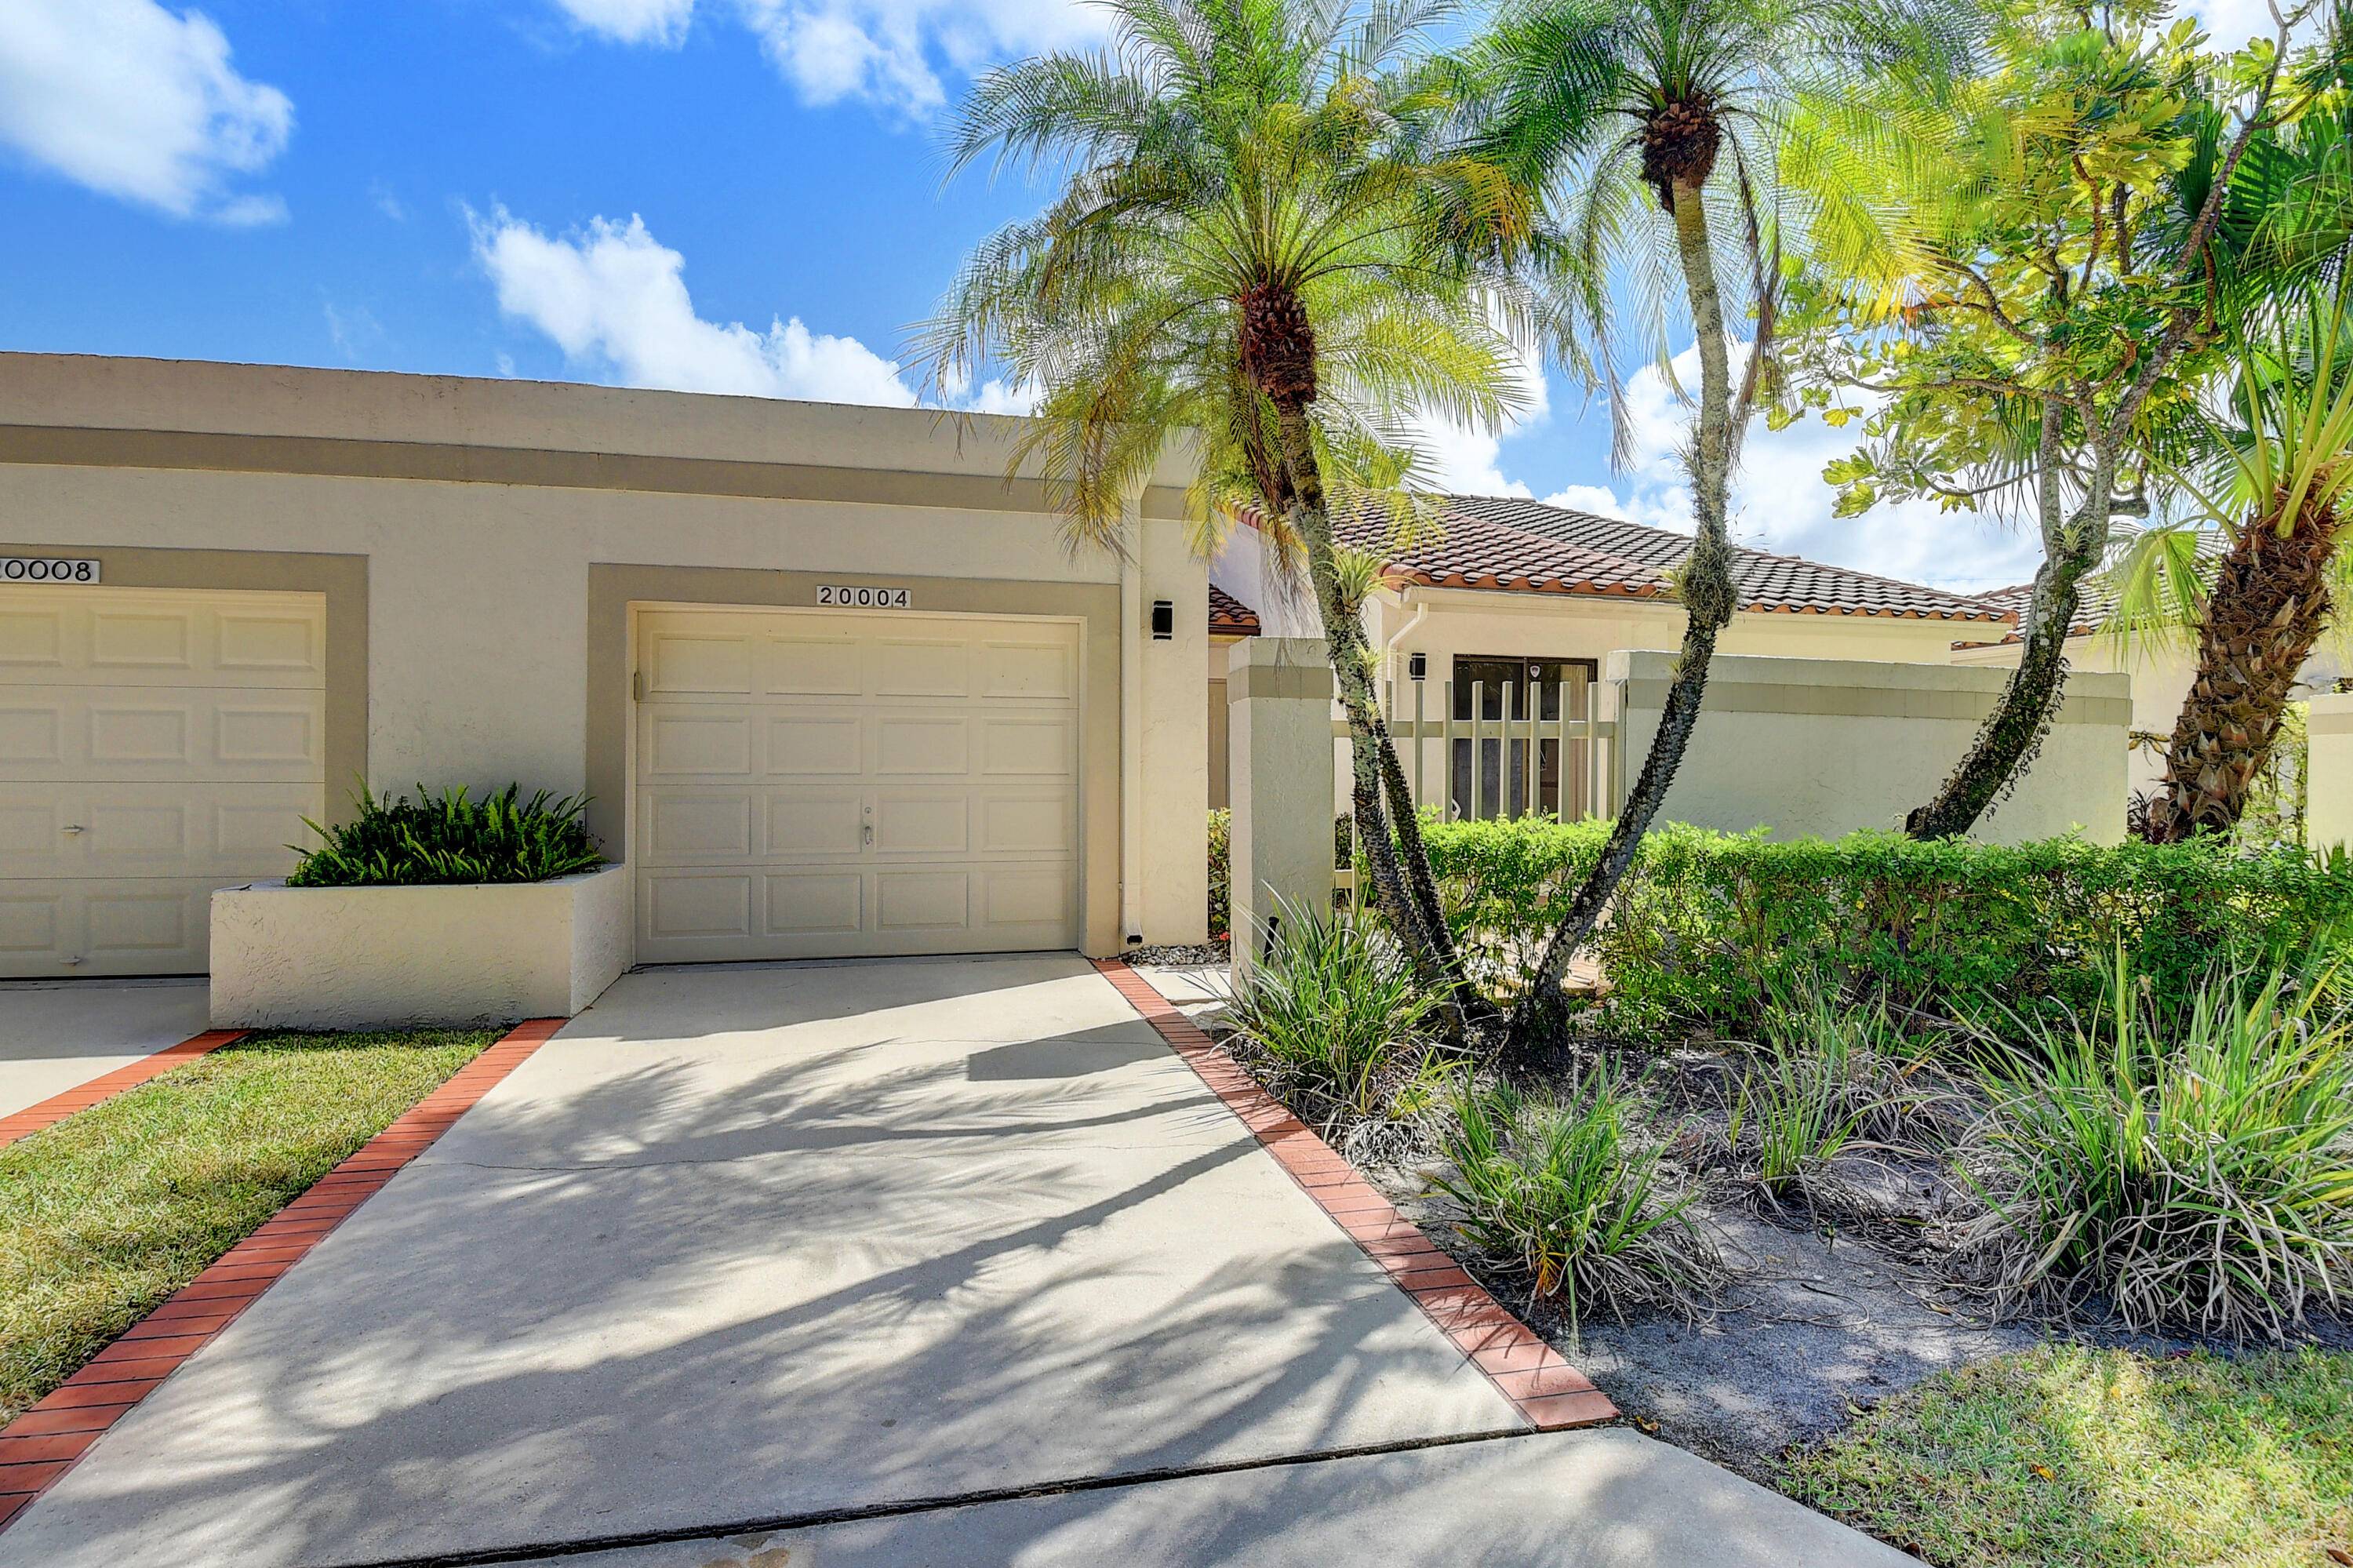 Gorgeous and well maintained villa in the heart of Boca Raton.